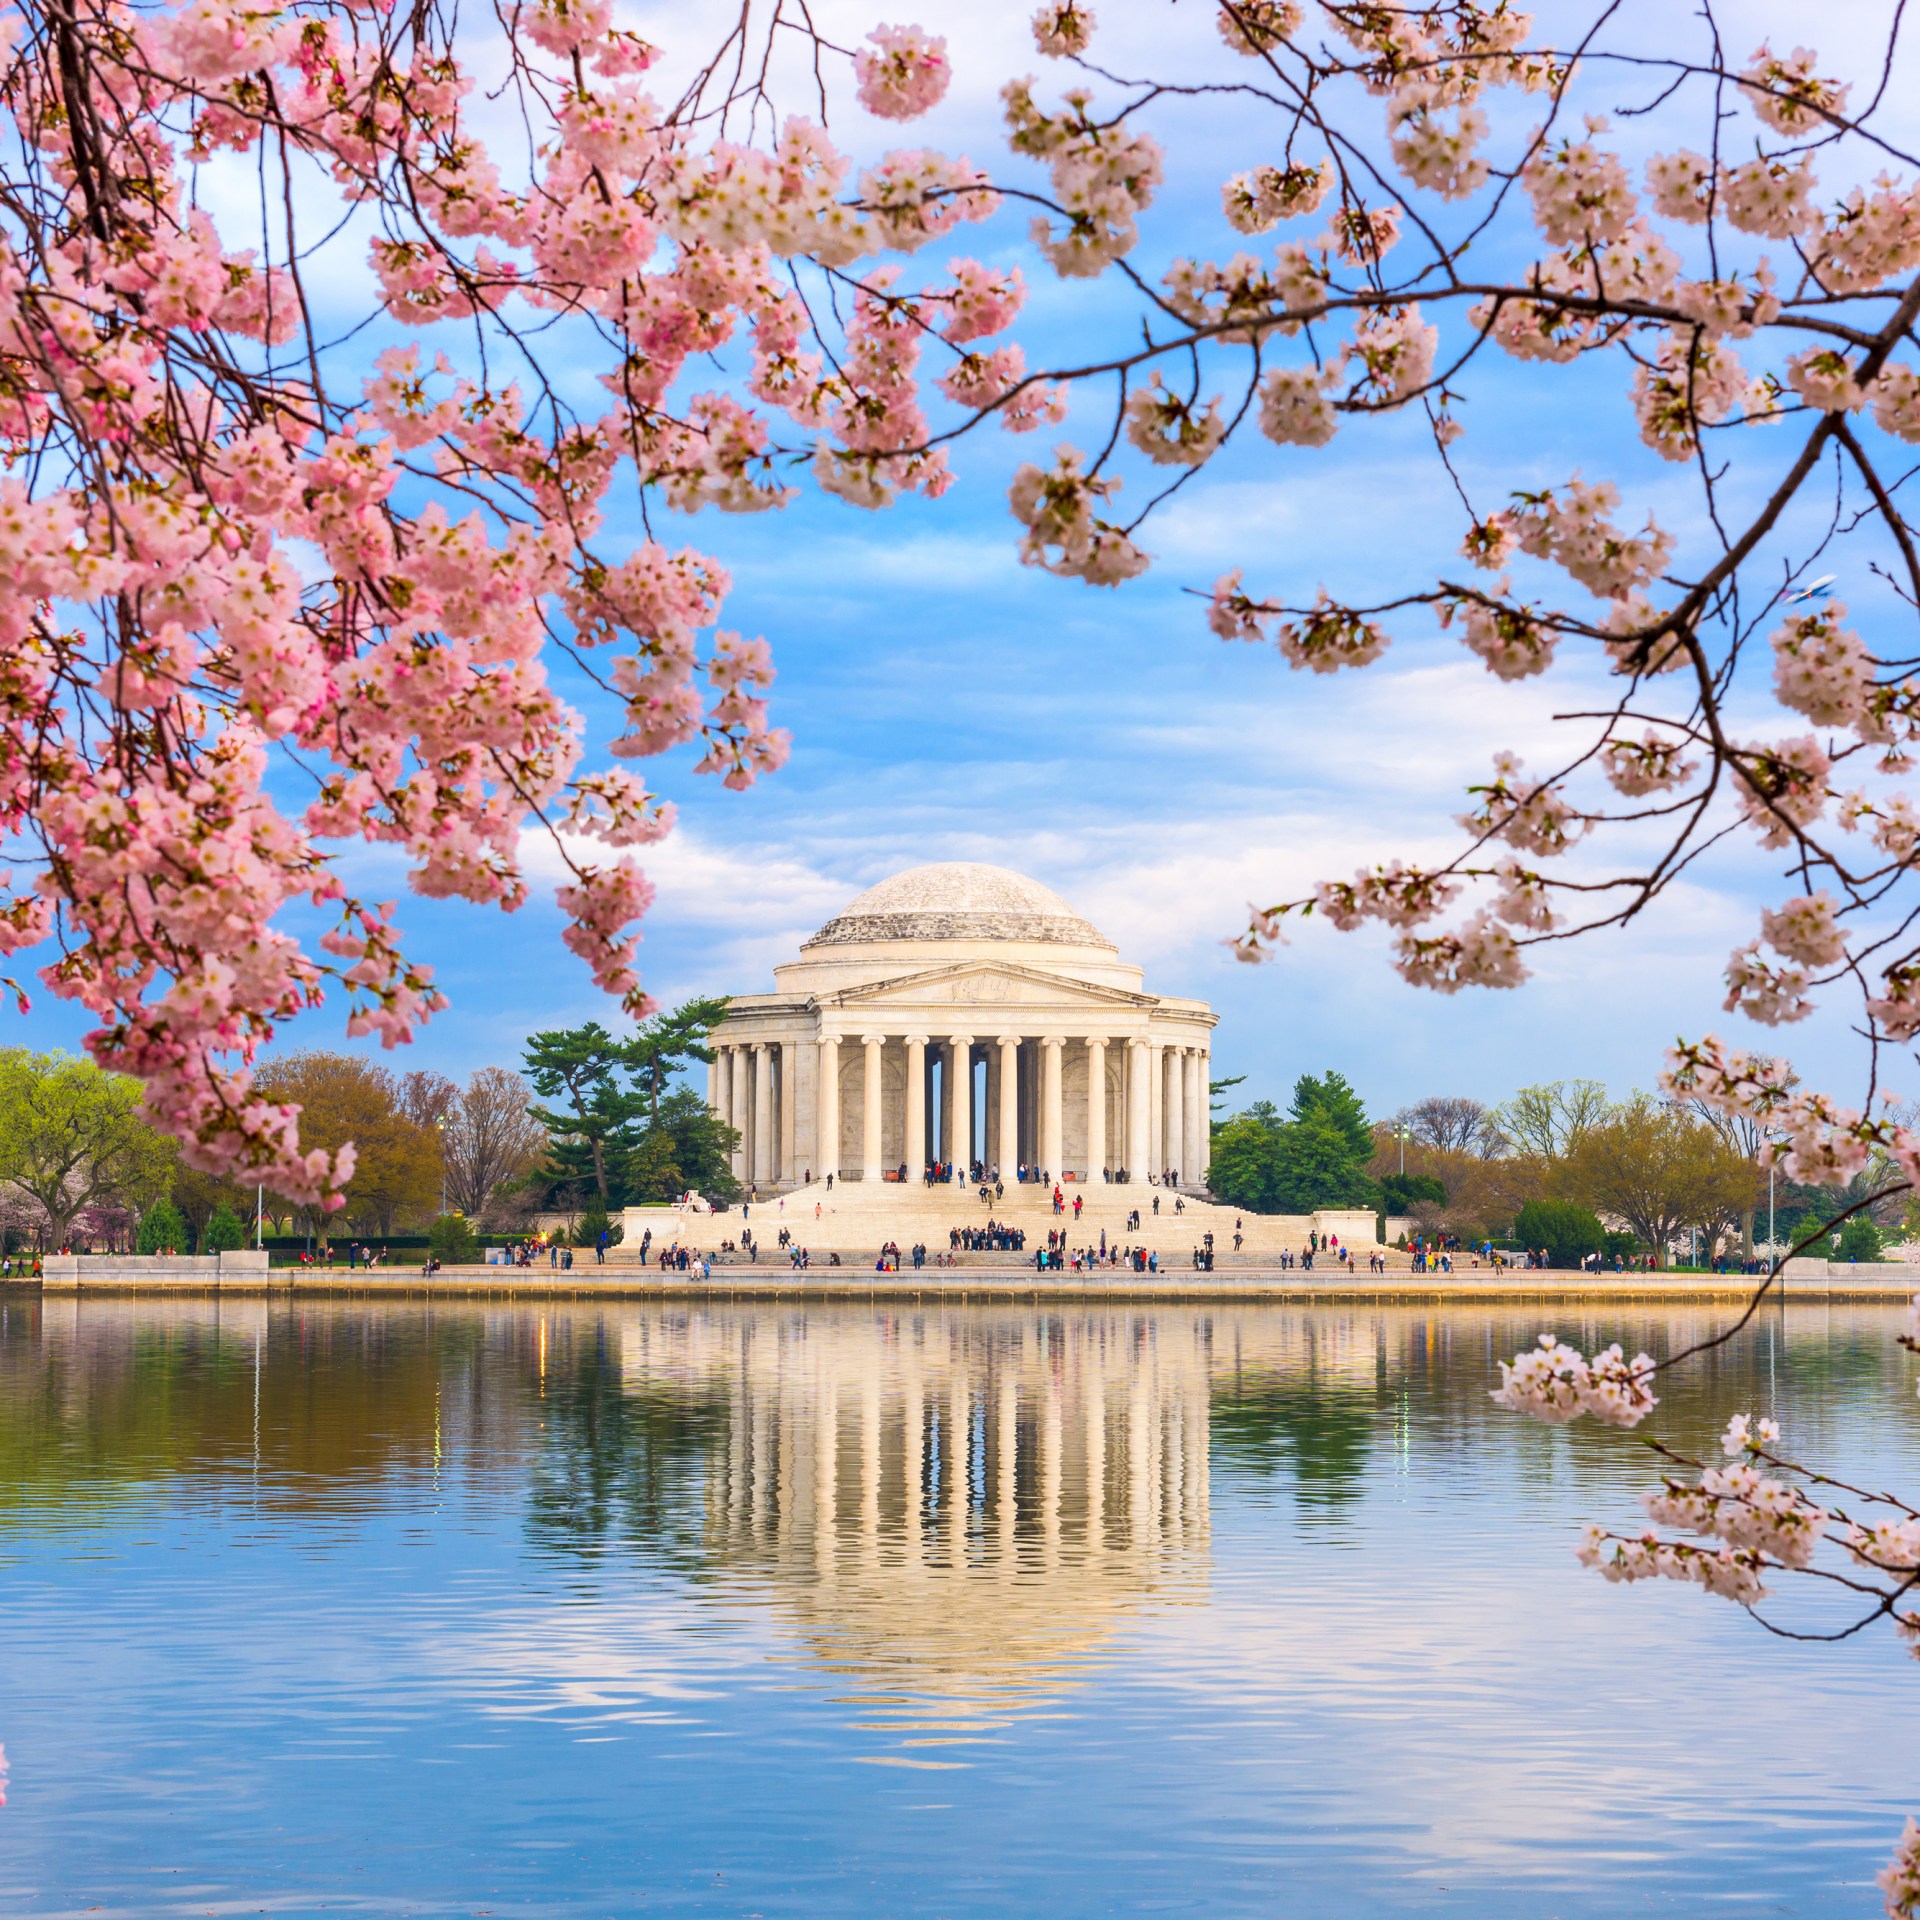 Washington Dc At The Tidal Basin And Jefferson Memorial During cherry blossom festival 2023 hotels